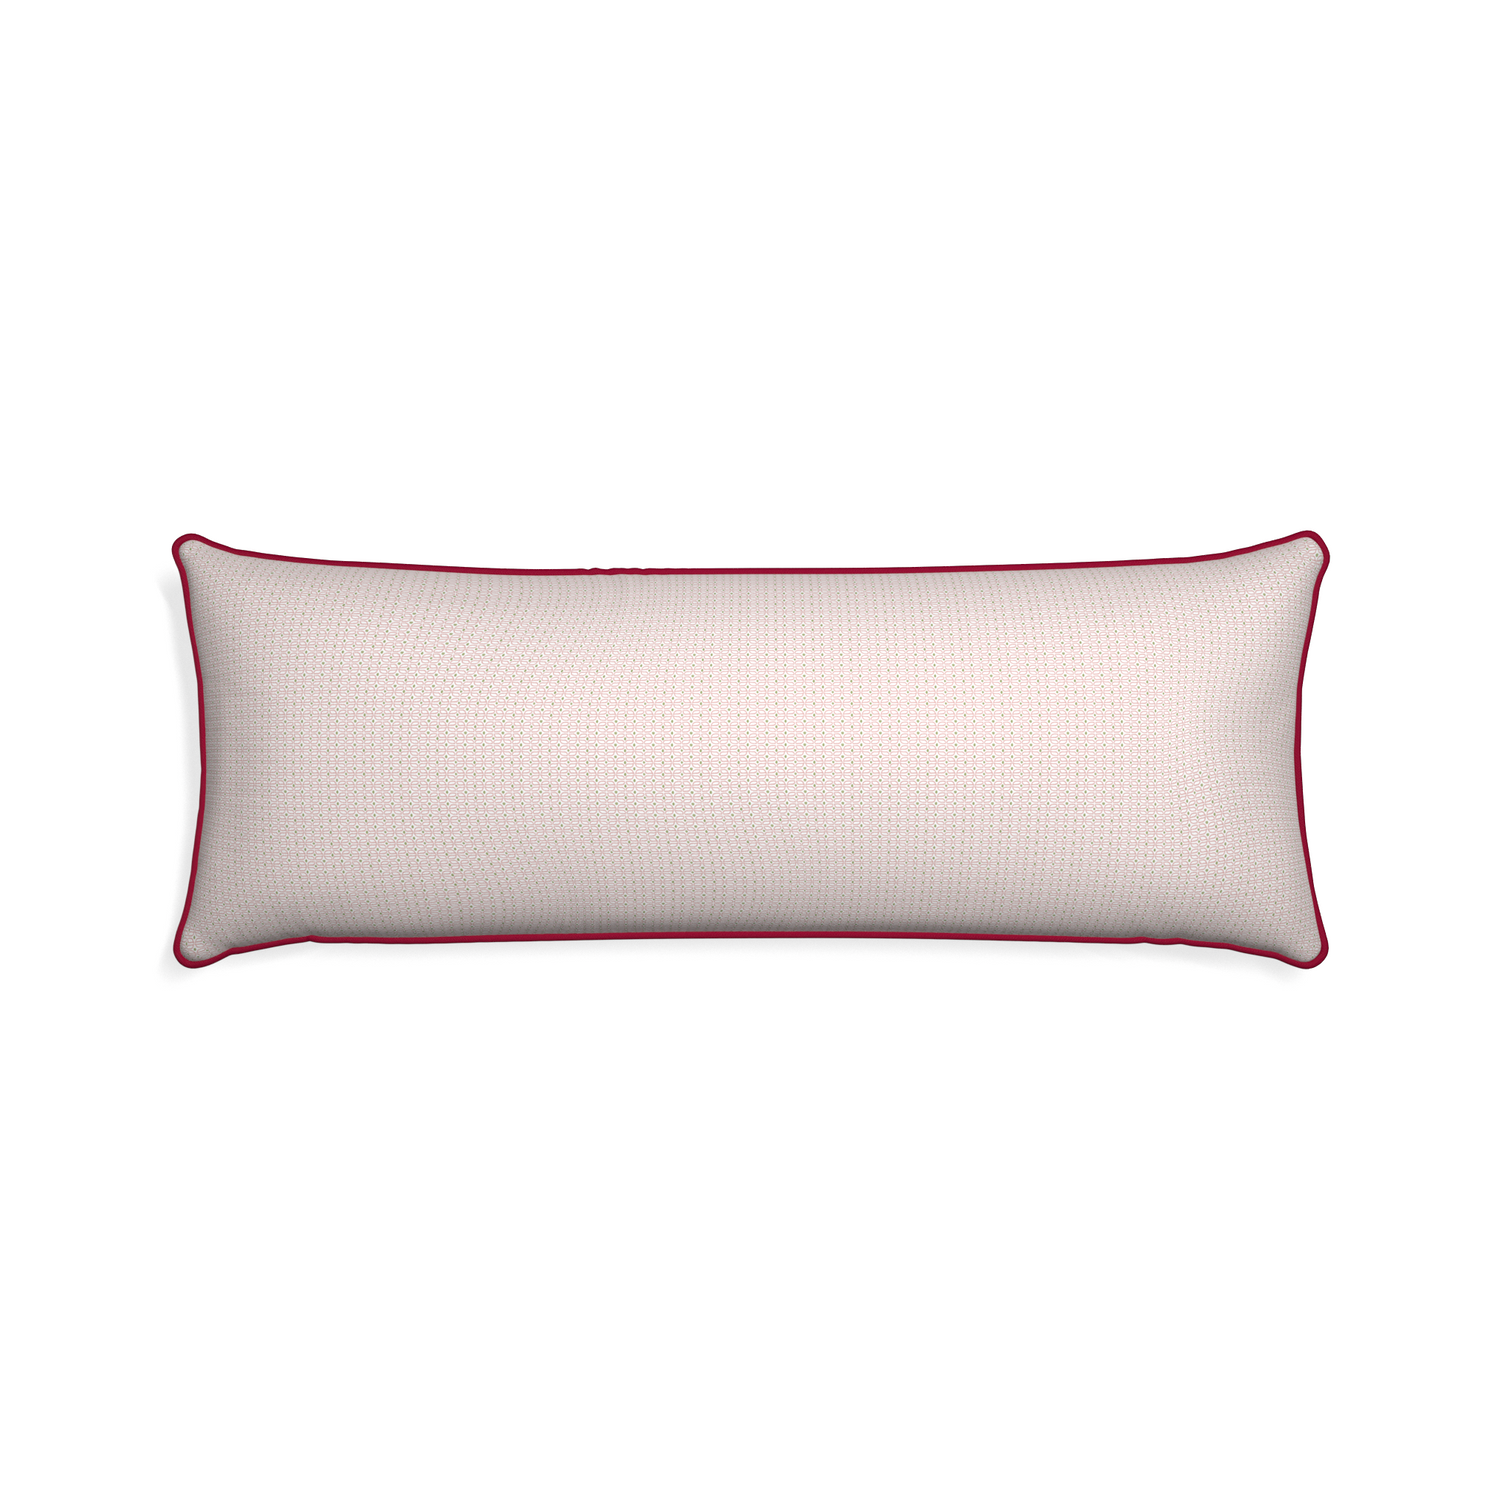 Xl-lumbar loomi pink custom pillow with raspberry piping on white background